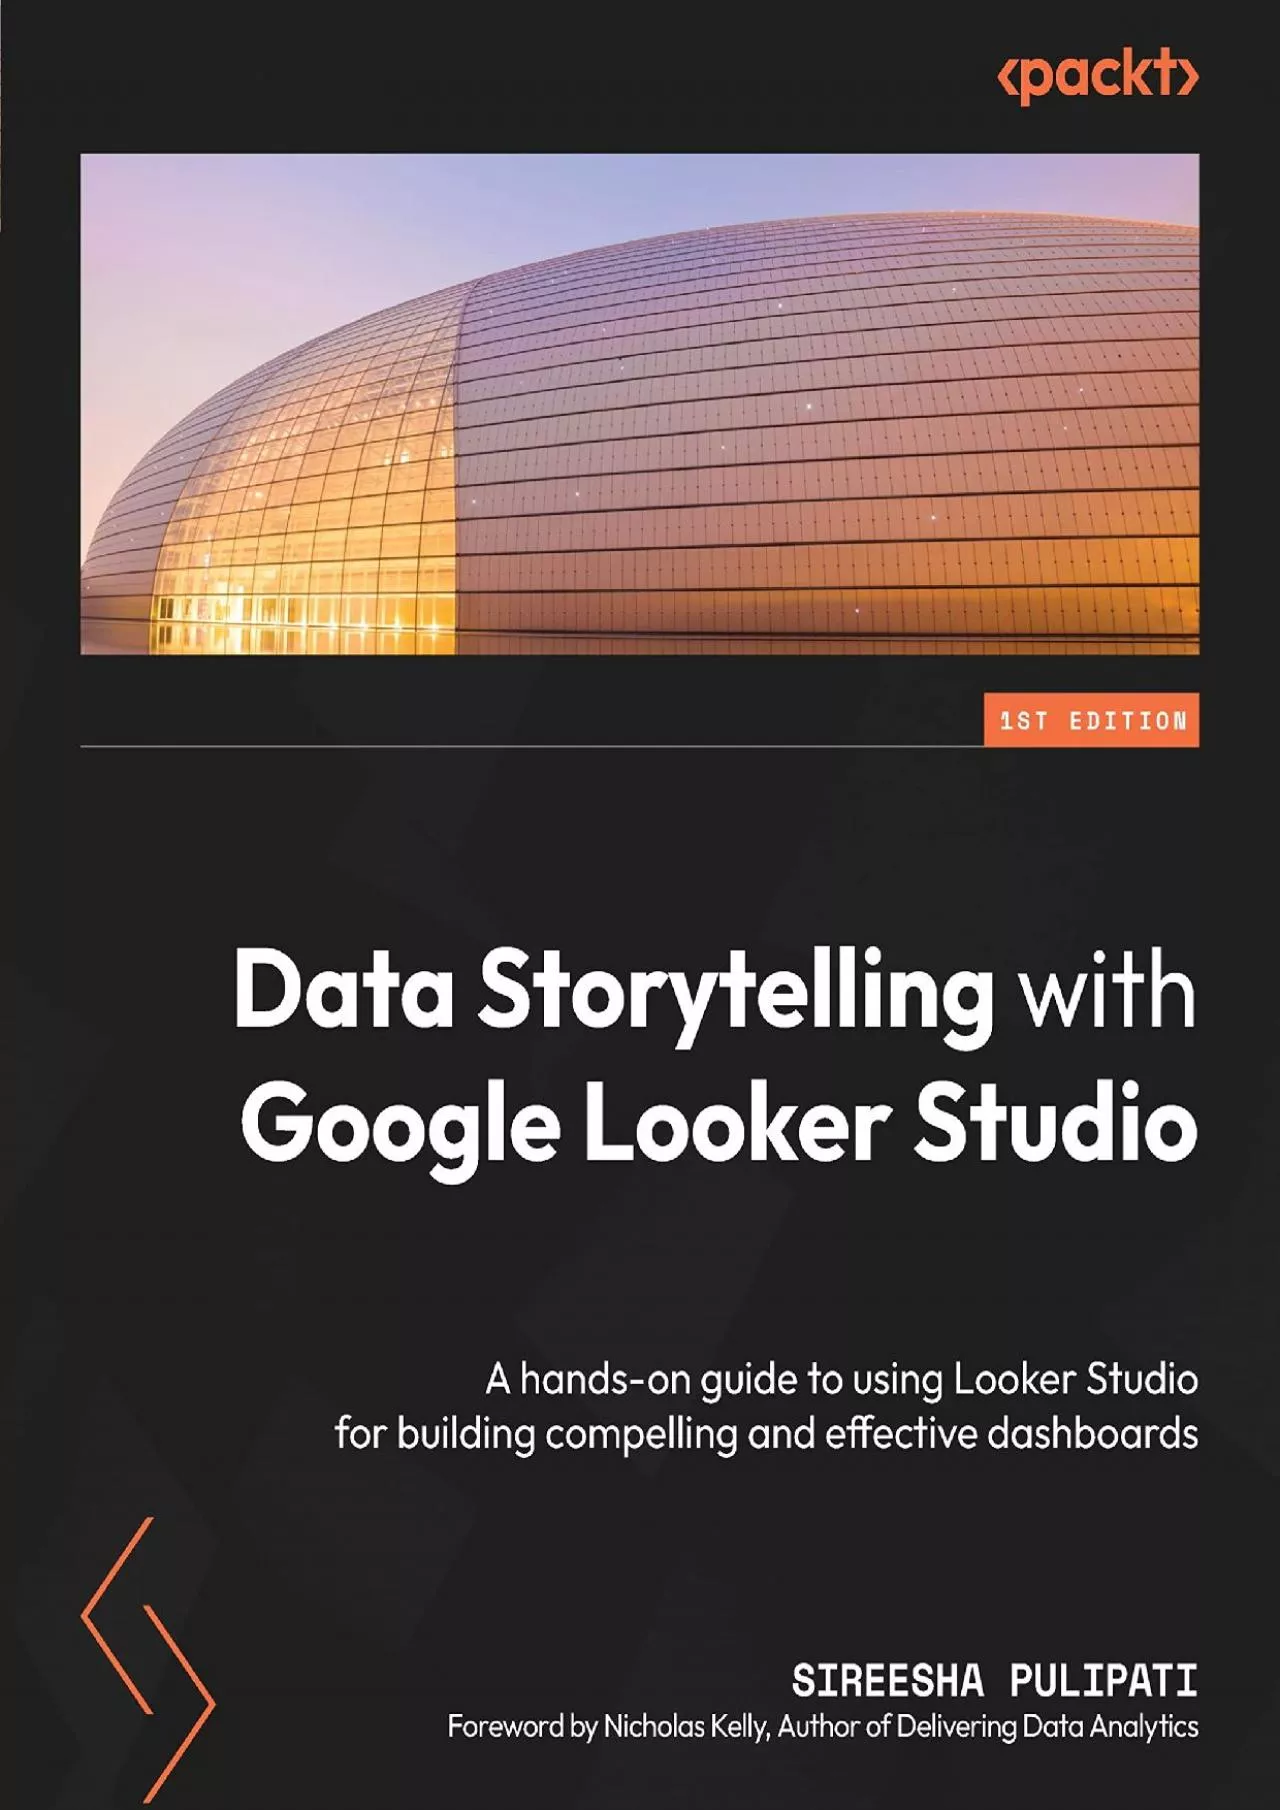 Data Storytelling with Google Looker Studio: A hands-on guide to using Looker Studio for